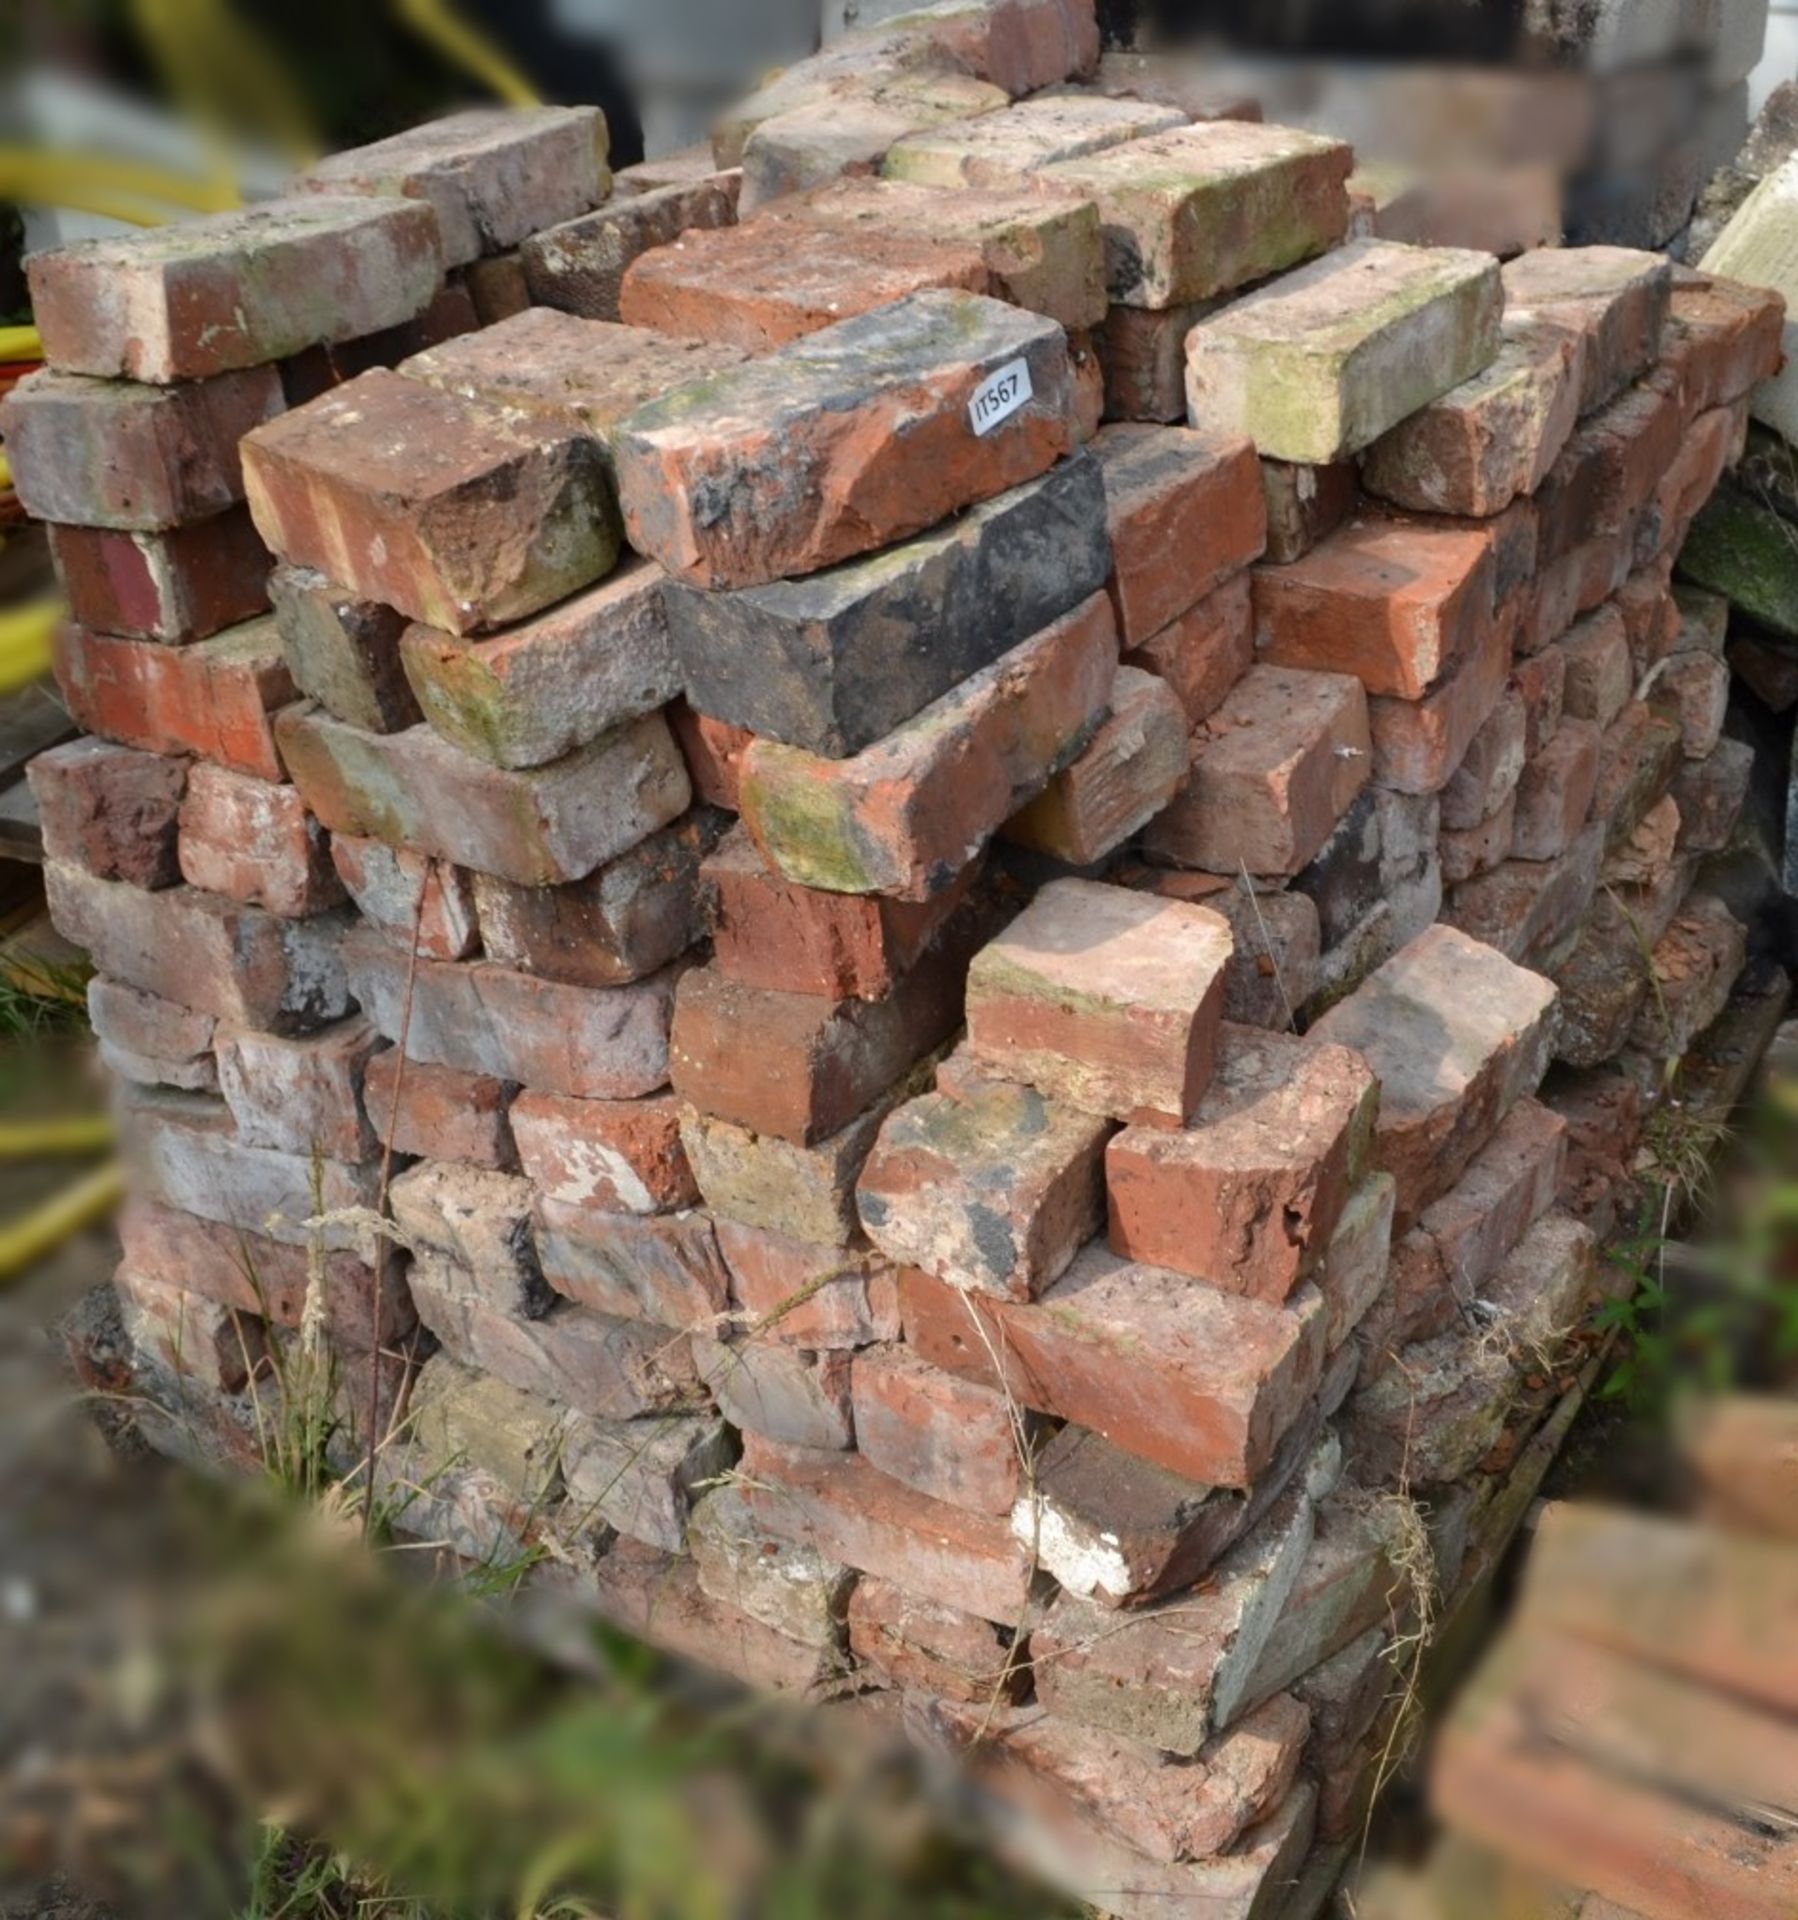 Assorted Reclaimed Hand Made Bricks - Approx 200 In Total - Average Dimensions: 22x11x7.5cm - Ref: